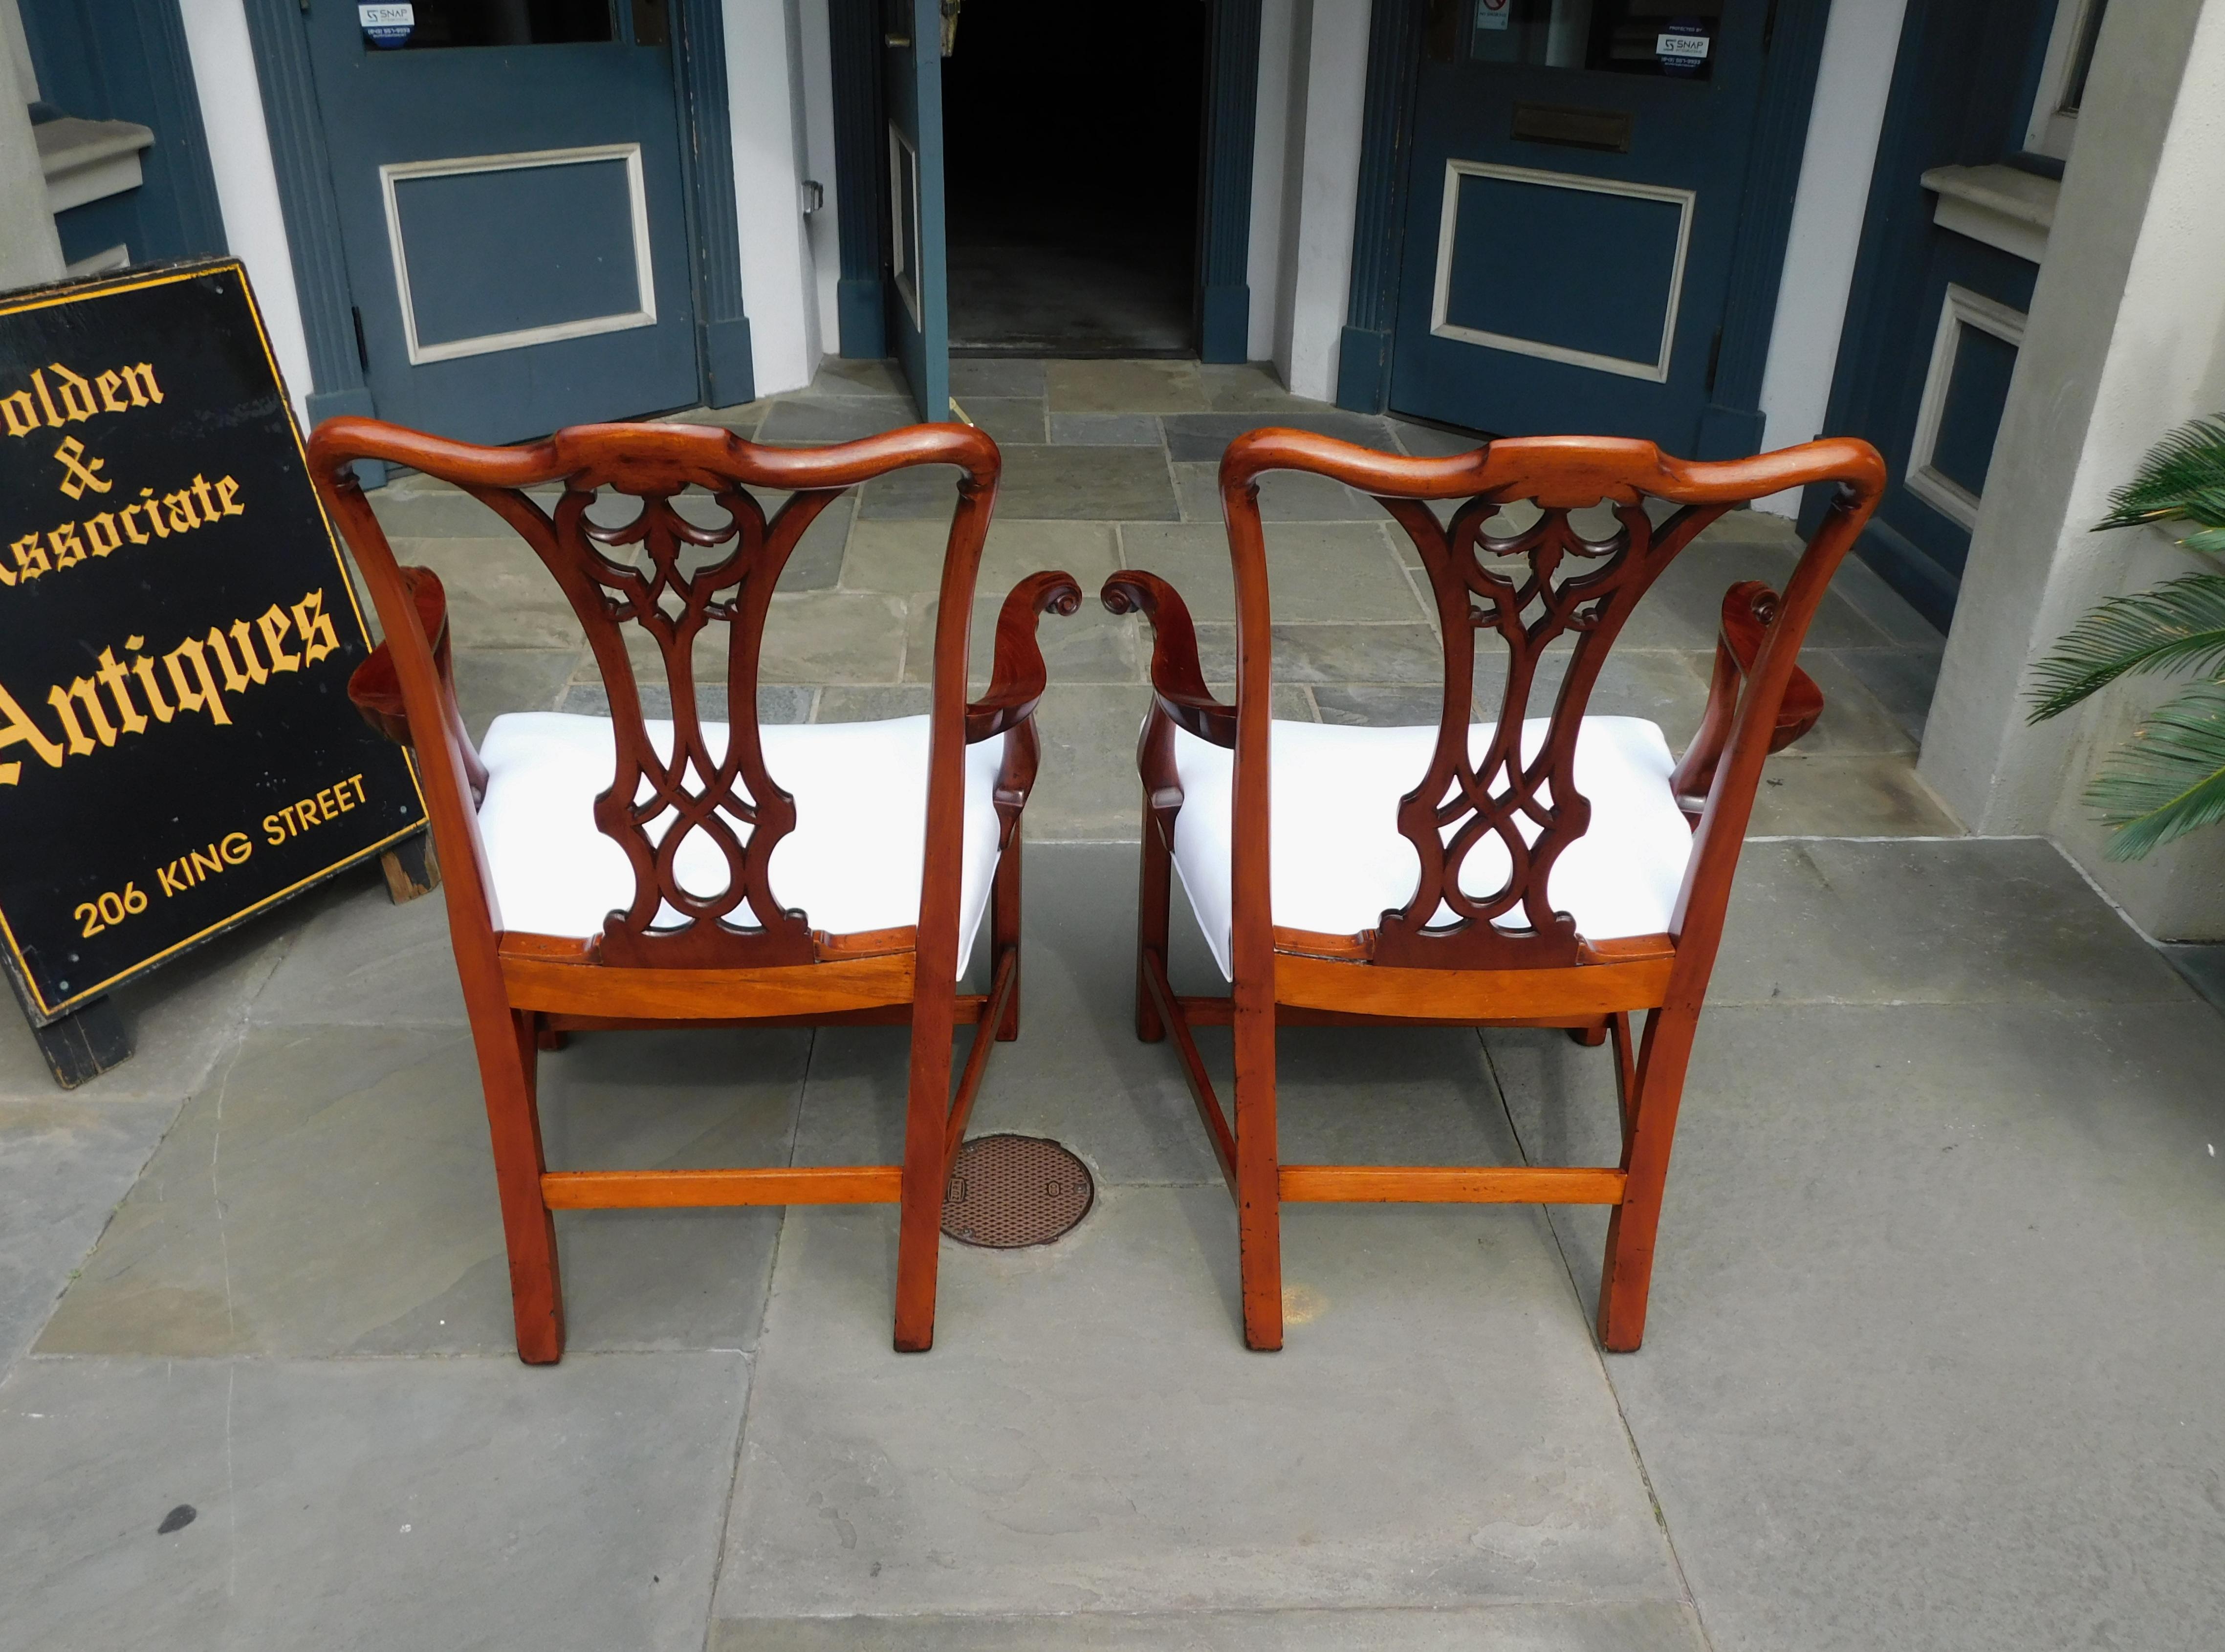 Pair of English Mahogany Serpentine Crest Arm Chairs with Saddle Seats, C. 1820 For Sale 8